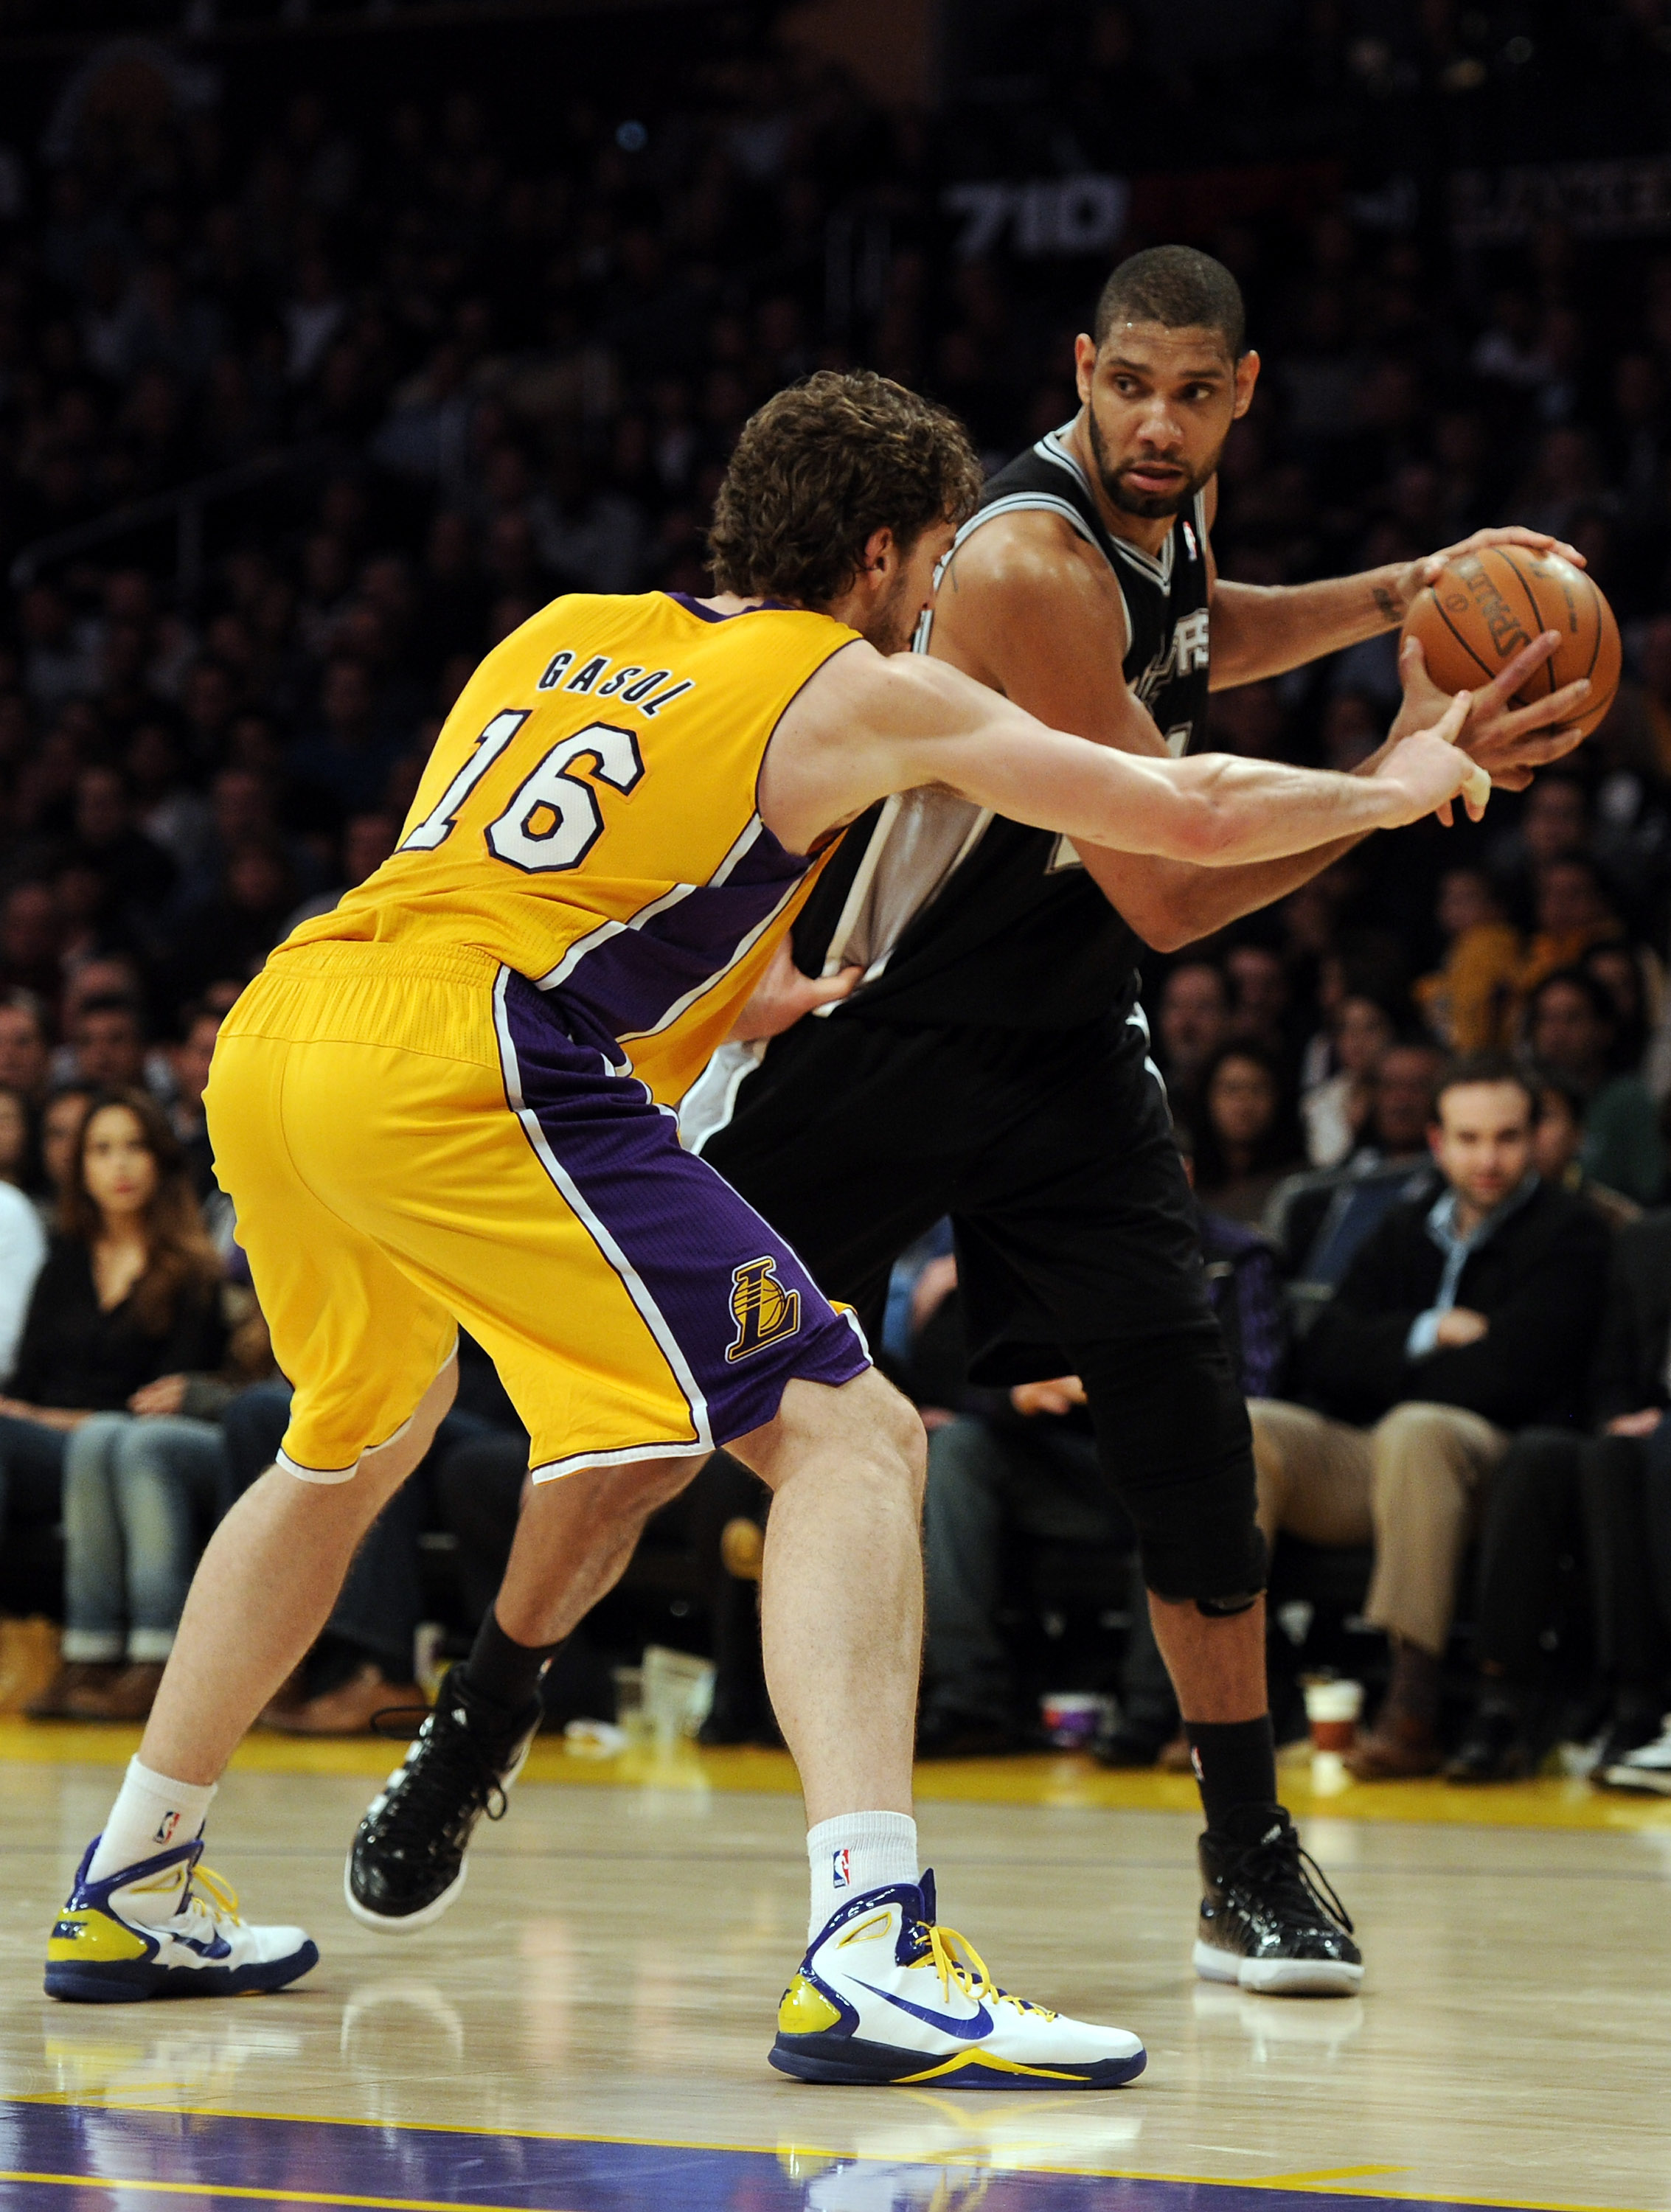 LOS ANGELES, CA - FEBRUARY 03:  Tim Duncan #21 of the San Antonio Spurs faces off against Pau Gasol #16 of the Los Angeles Lakers during a 89-88 Spur victory at Staples Center on February 3, 2011 in Los Angeles, California.  NOTE TO USER: User expressly a